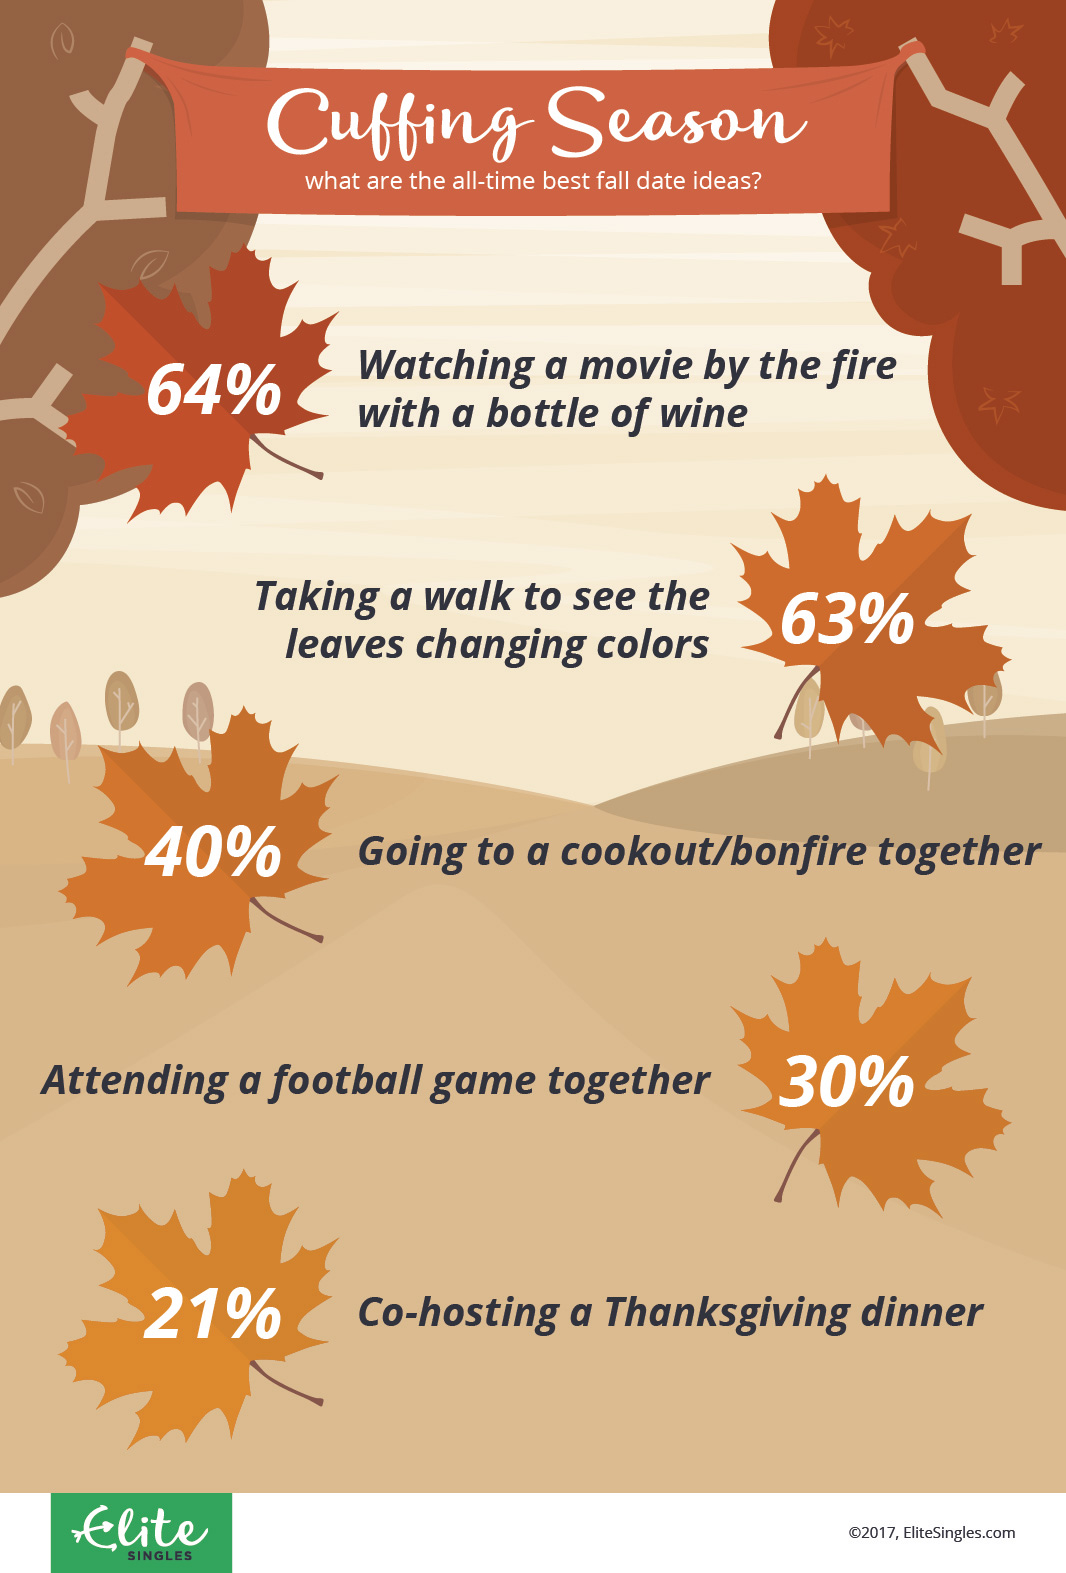 Cuffing season  - is it real? Infographic from EliteSingles